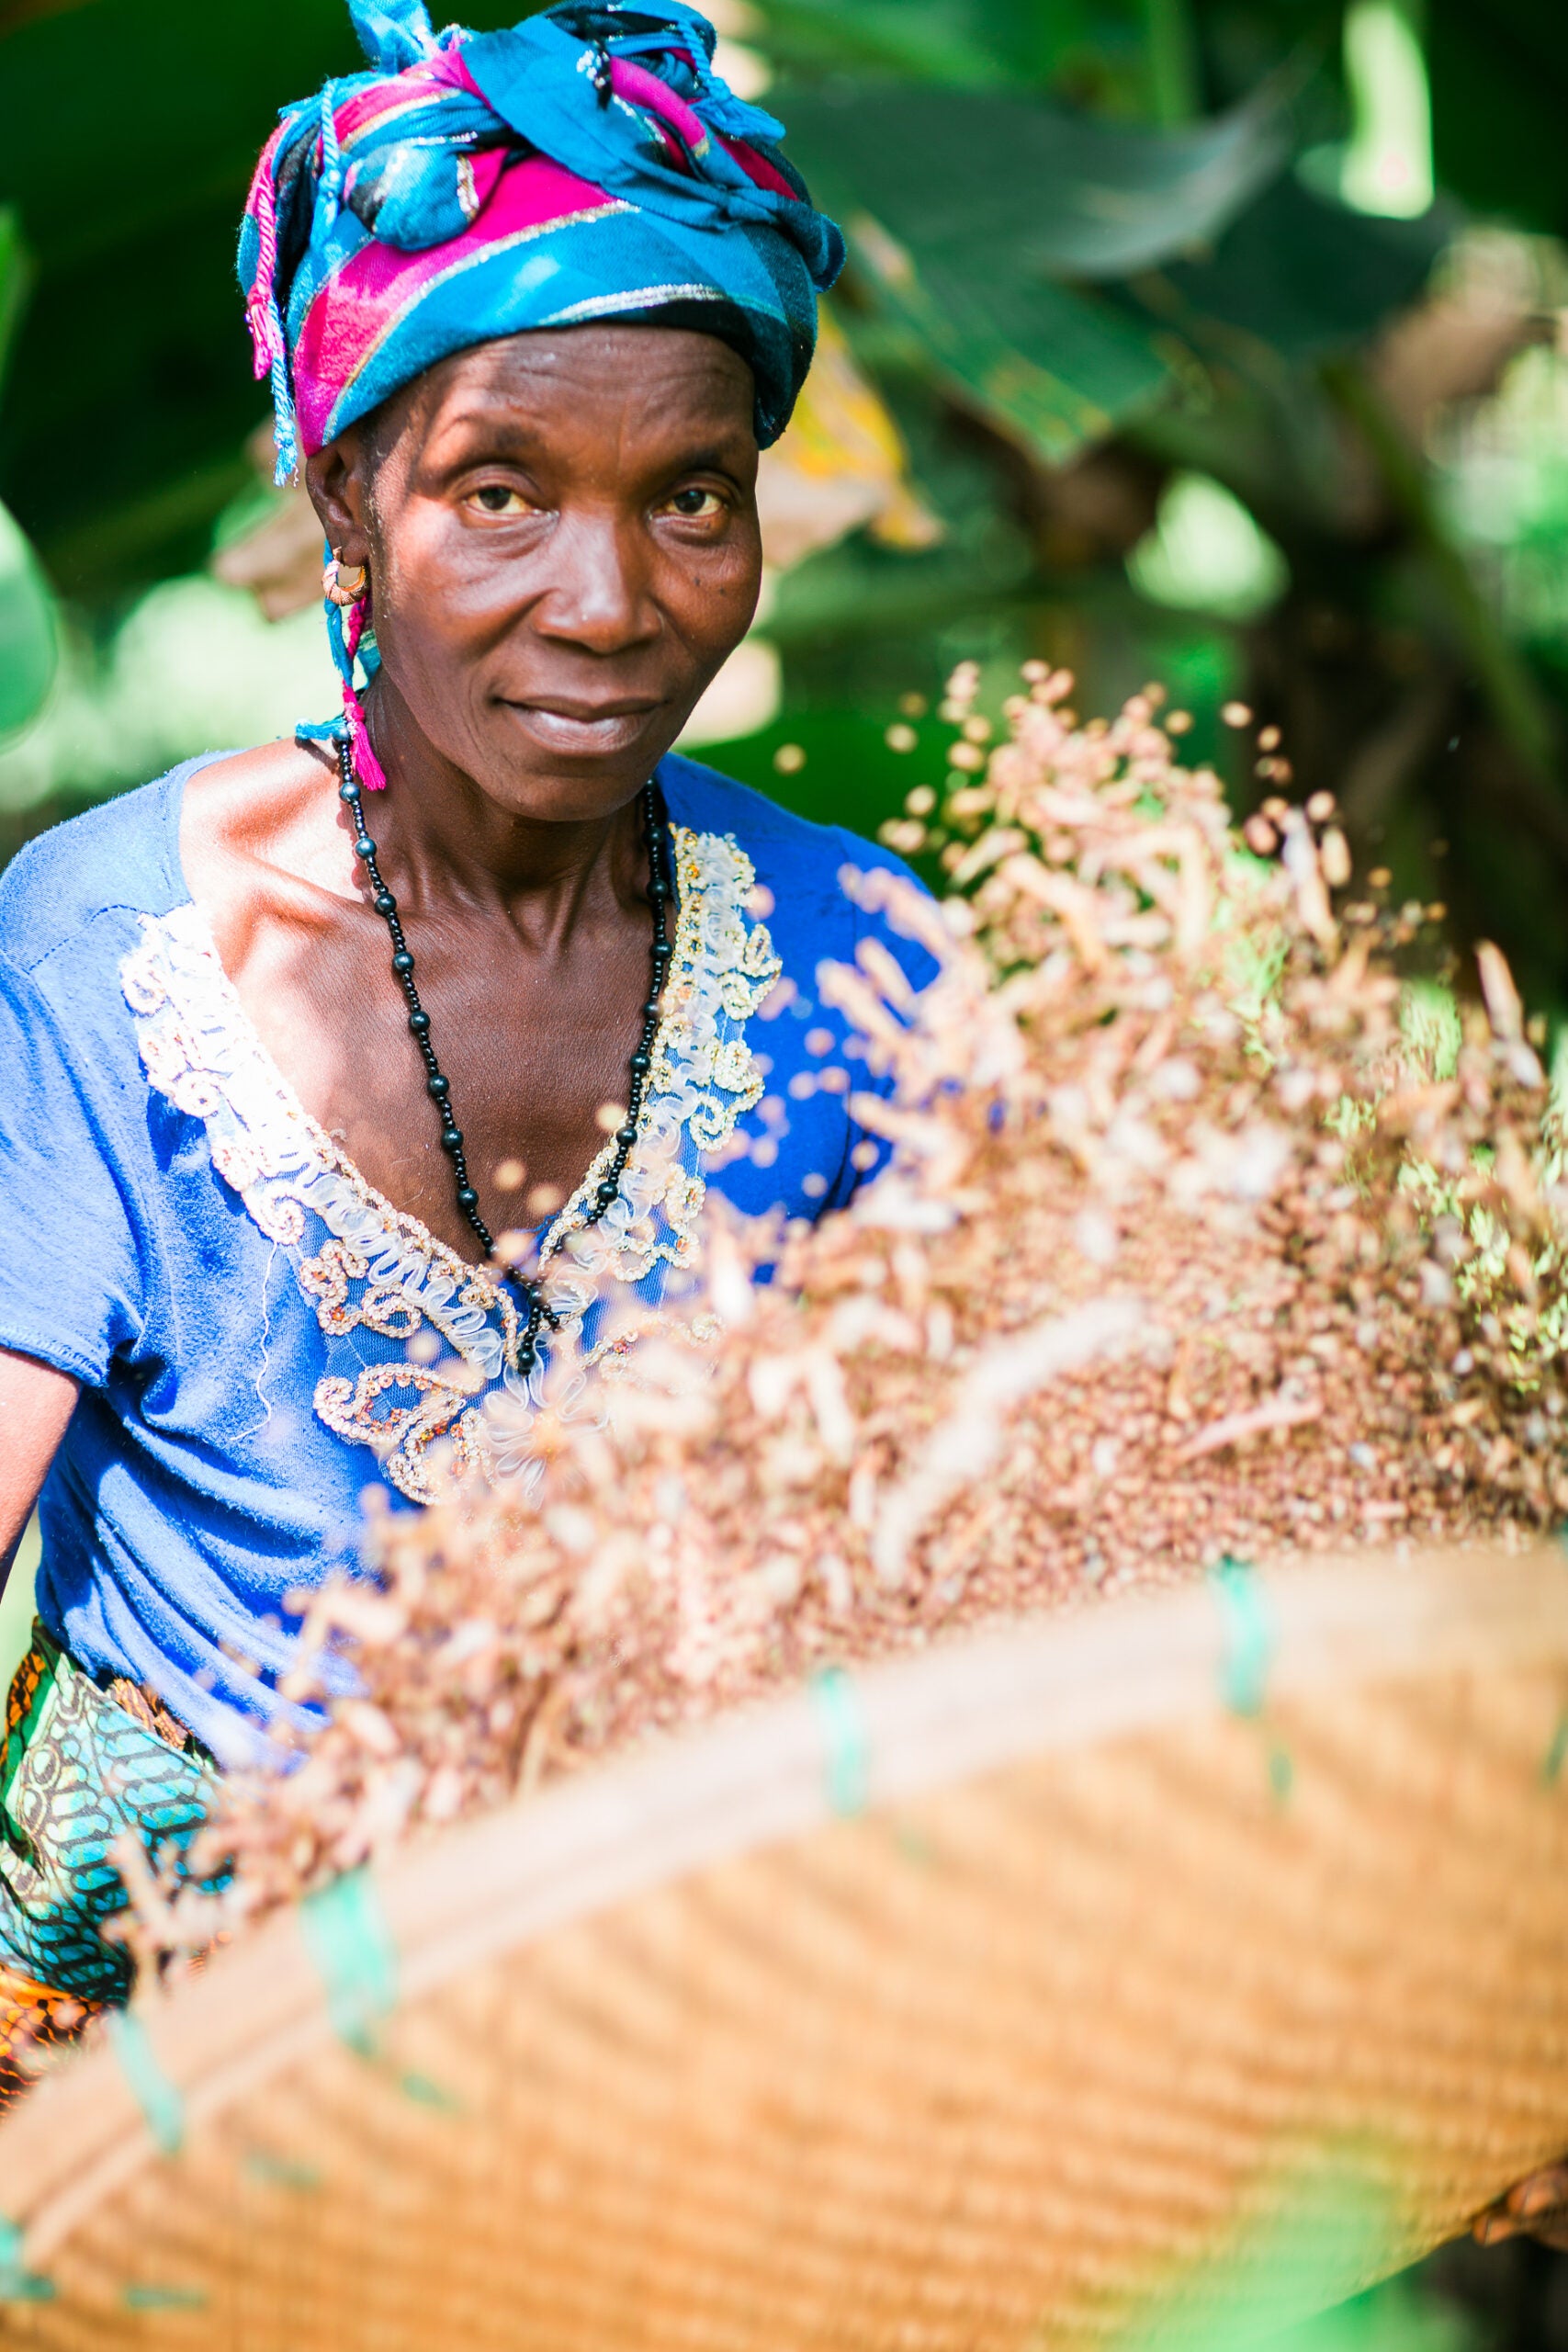 Woman working in agriculture